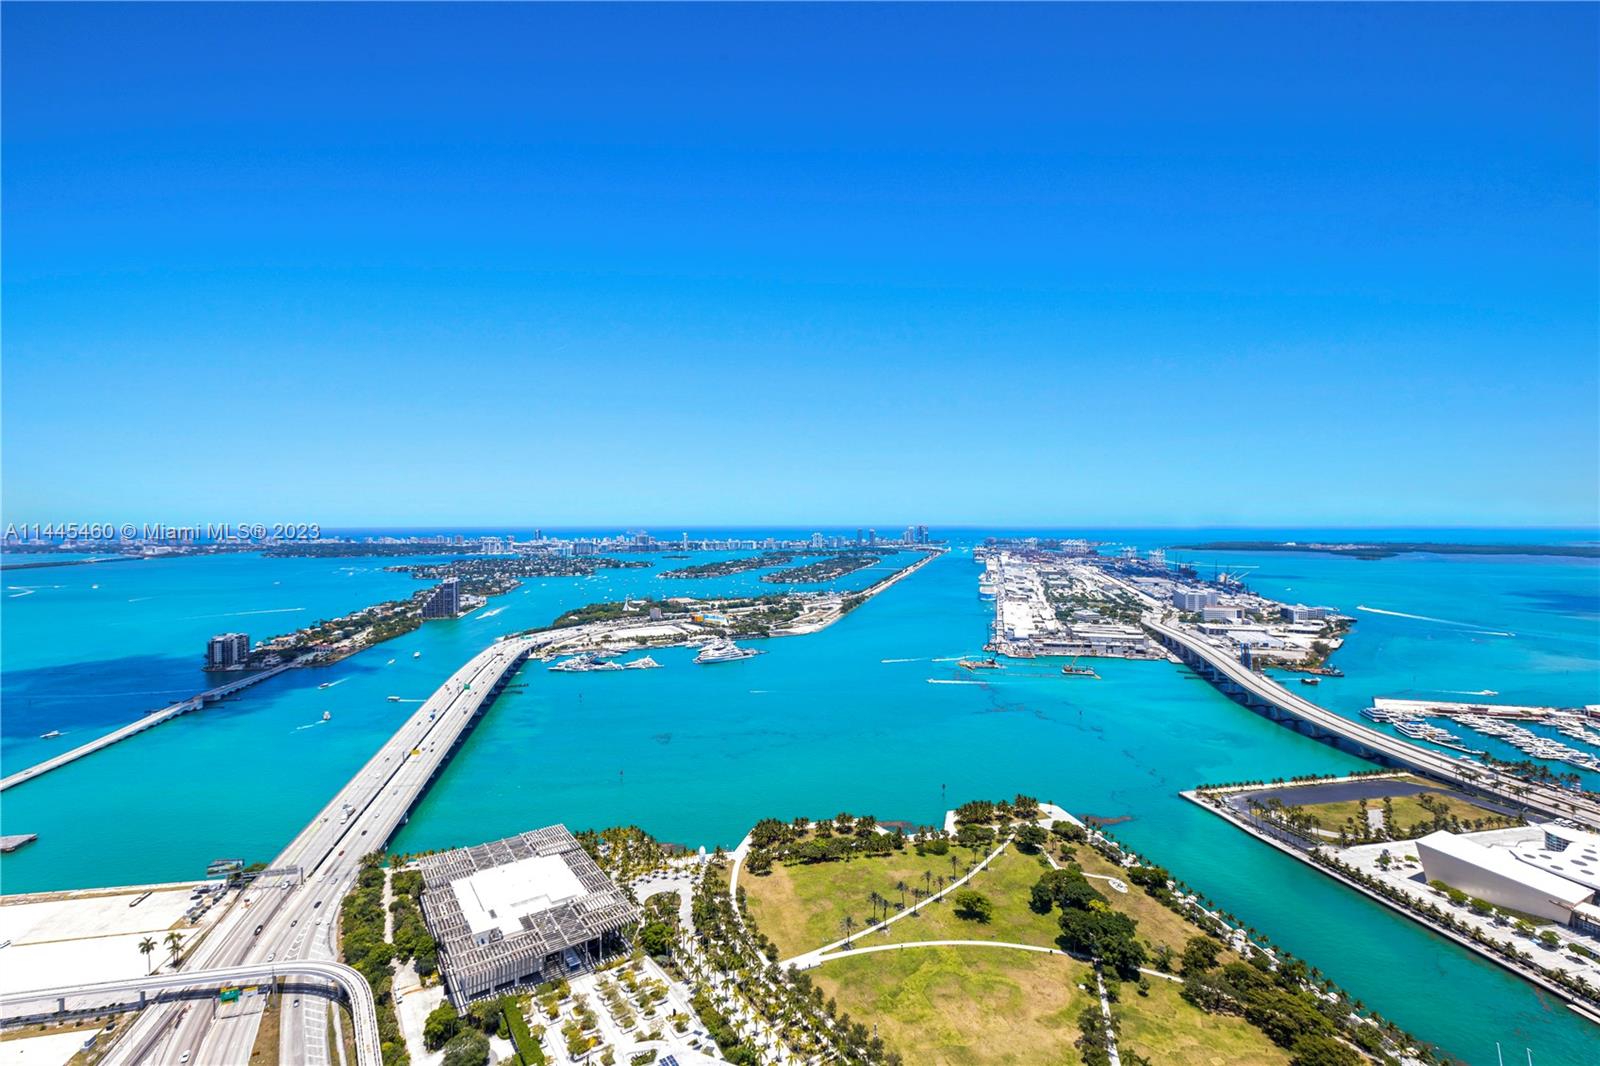 2-Story Penthouse w/ impressive views of Biscayne Bay, Atlantic Ocean, Miami Beach & the Miami Skyline & 20-foot ceilings. 4 Bed/4.5 Bath 3,800 SF Residence features a 428 Sq Ft terrace. Floor to ceiling windows, allowing for tons natural light, white glass floors, Custom State-of-the-Art Modern kitchen w/ Viking Appliances + Wine Fridge. Master Suite w/ Direct Views of Biscayne Bay & the Atlantic Ocean featuring Expansive Walk-in Closet. Spacious Master Bath w/ Shower + Soaking Tub & Private toilet room. Marquis is a full-service luxury building offering 5-star amenities including a lap pool, fitness center, spa, 24-hour valet & concierge services. Located in the cultural heart of Miami right next to the Performing Arts Center, Opera/Ballet, Museum of Modern Art & American Airlines Arena.